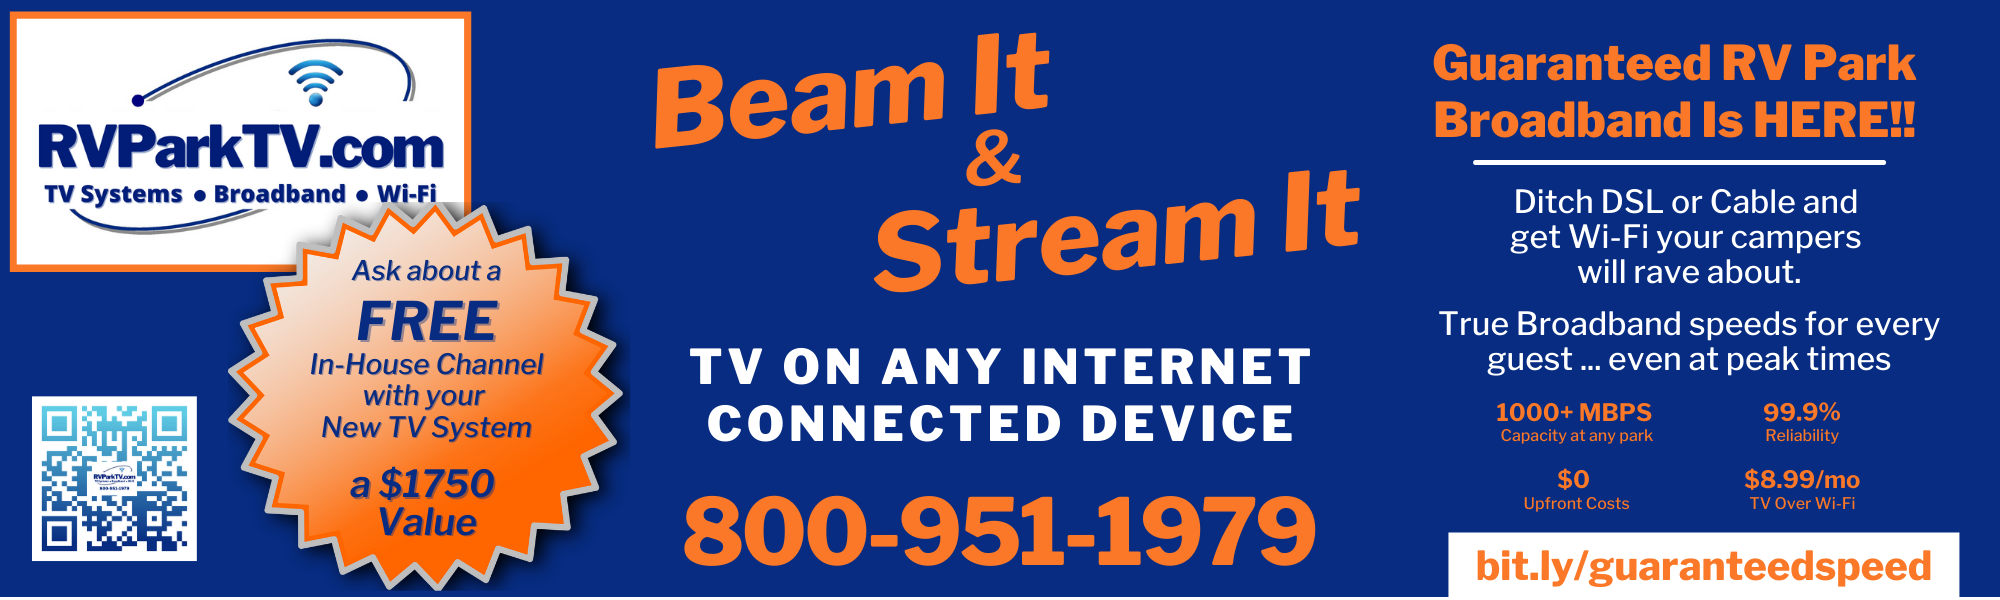 AD beam it and stream it wifi